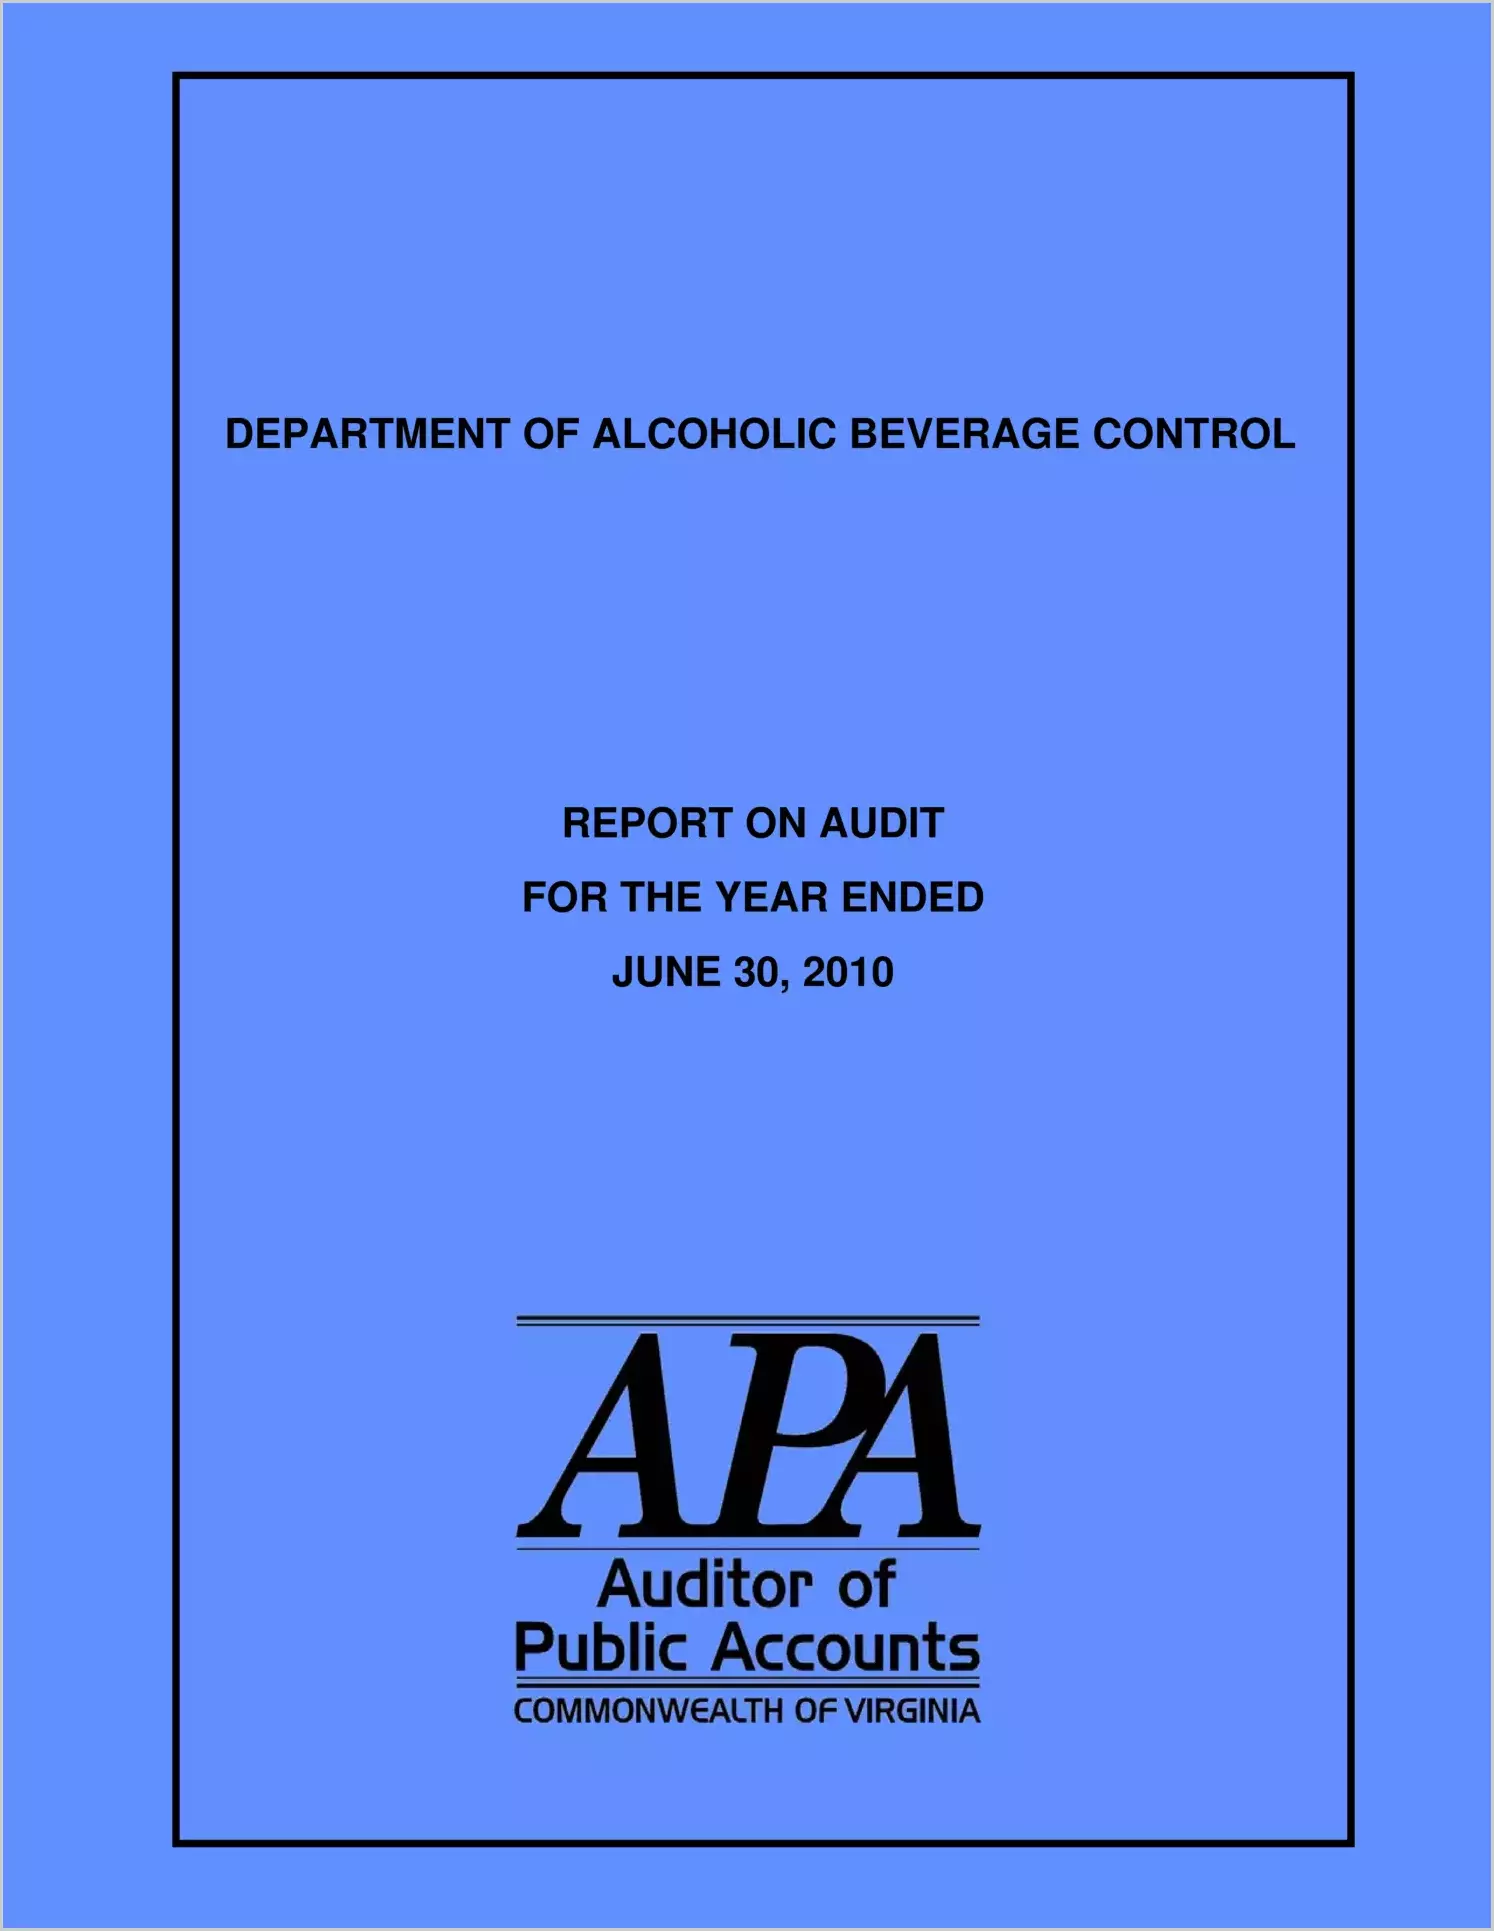 Department of Alcoholic Beverage Control as of and for the year then ended June 30, 2010